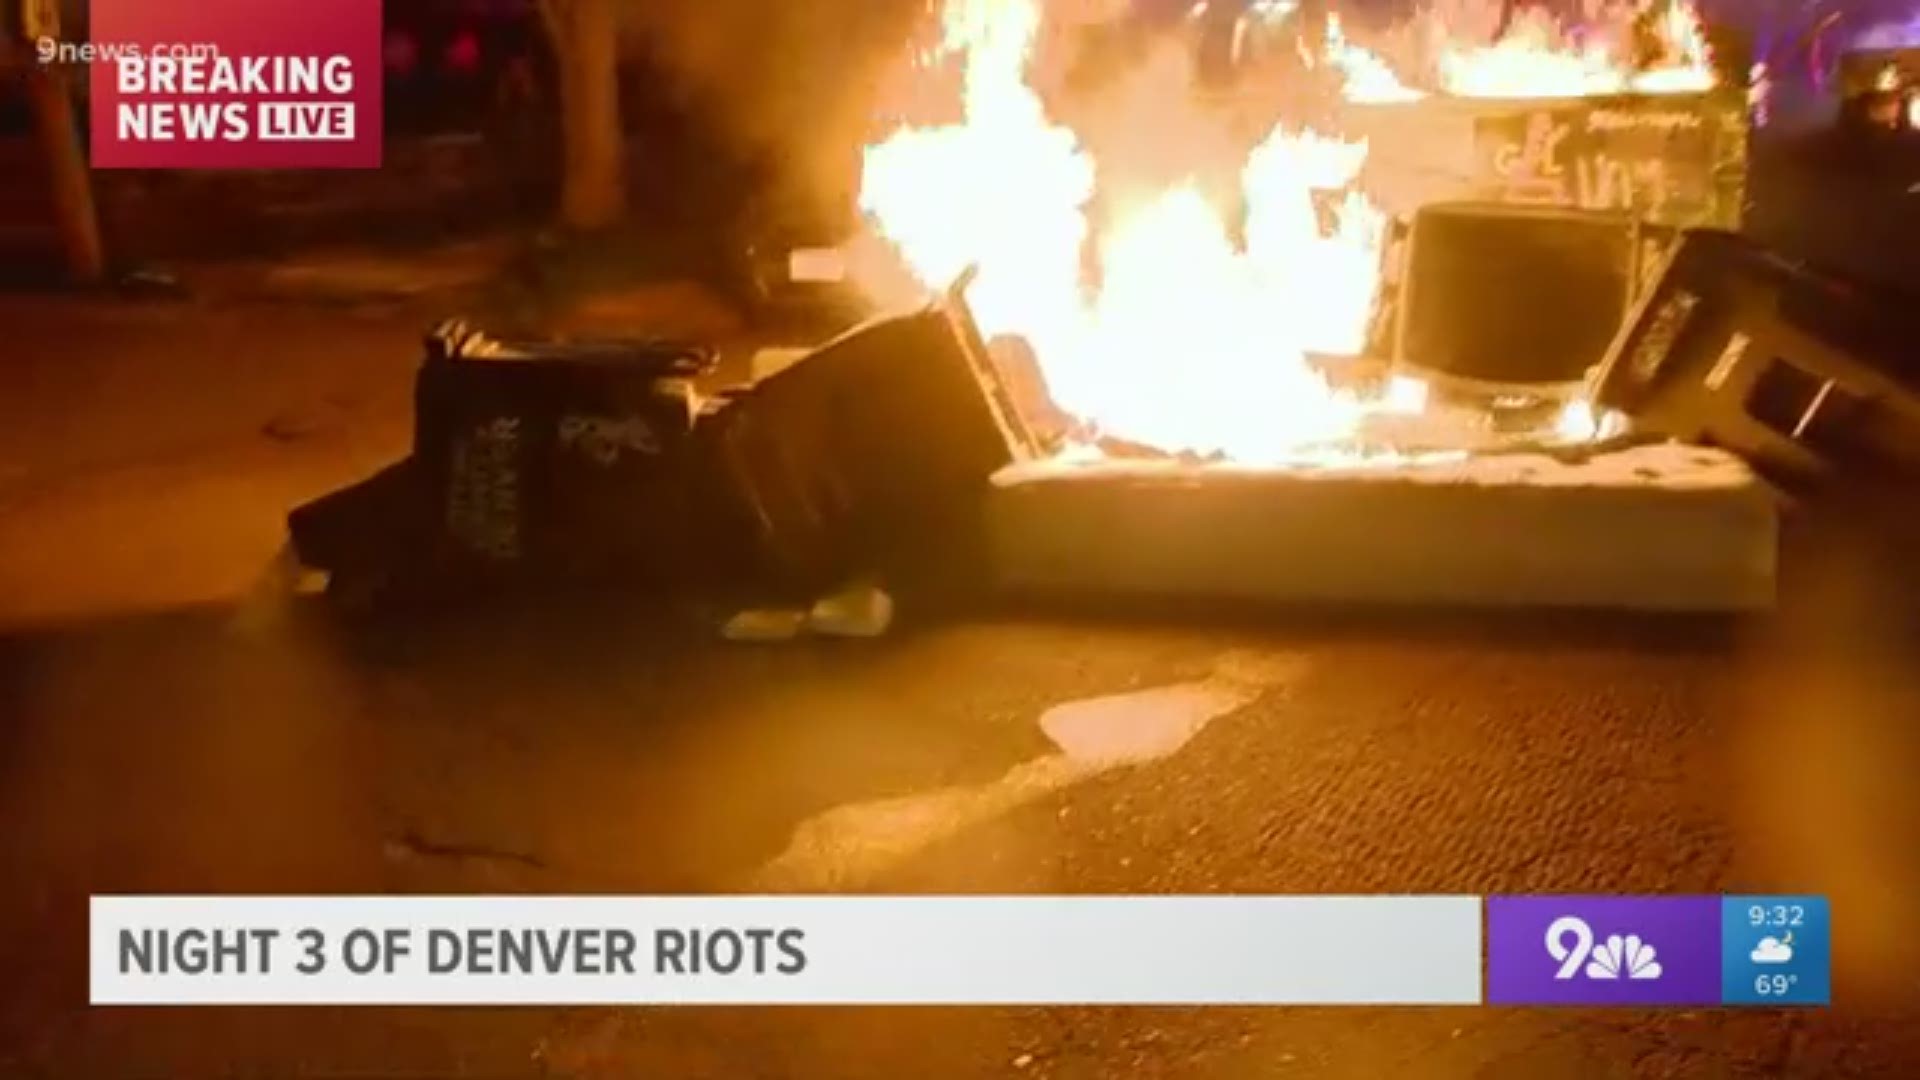 Items were set ablaze in the middle of a Denver street Saturday evening as the third night of protests turned into riots.